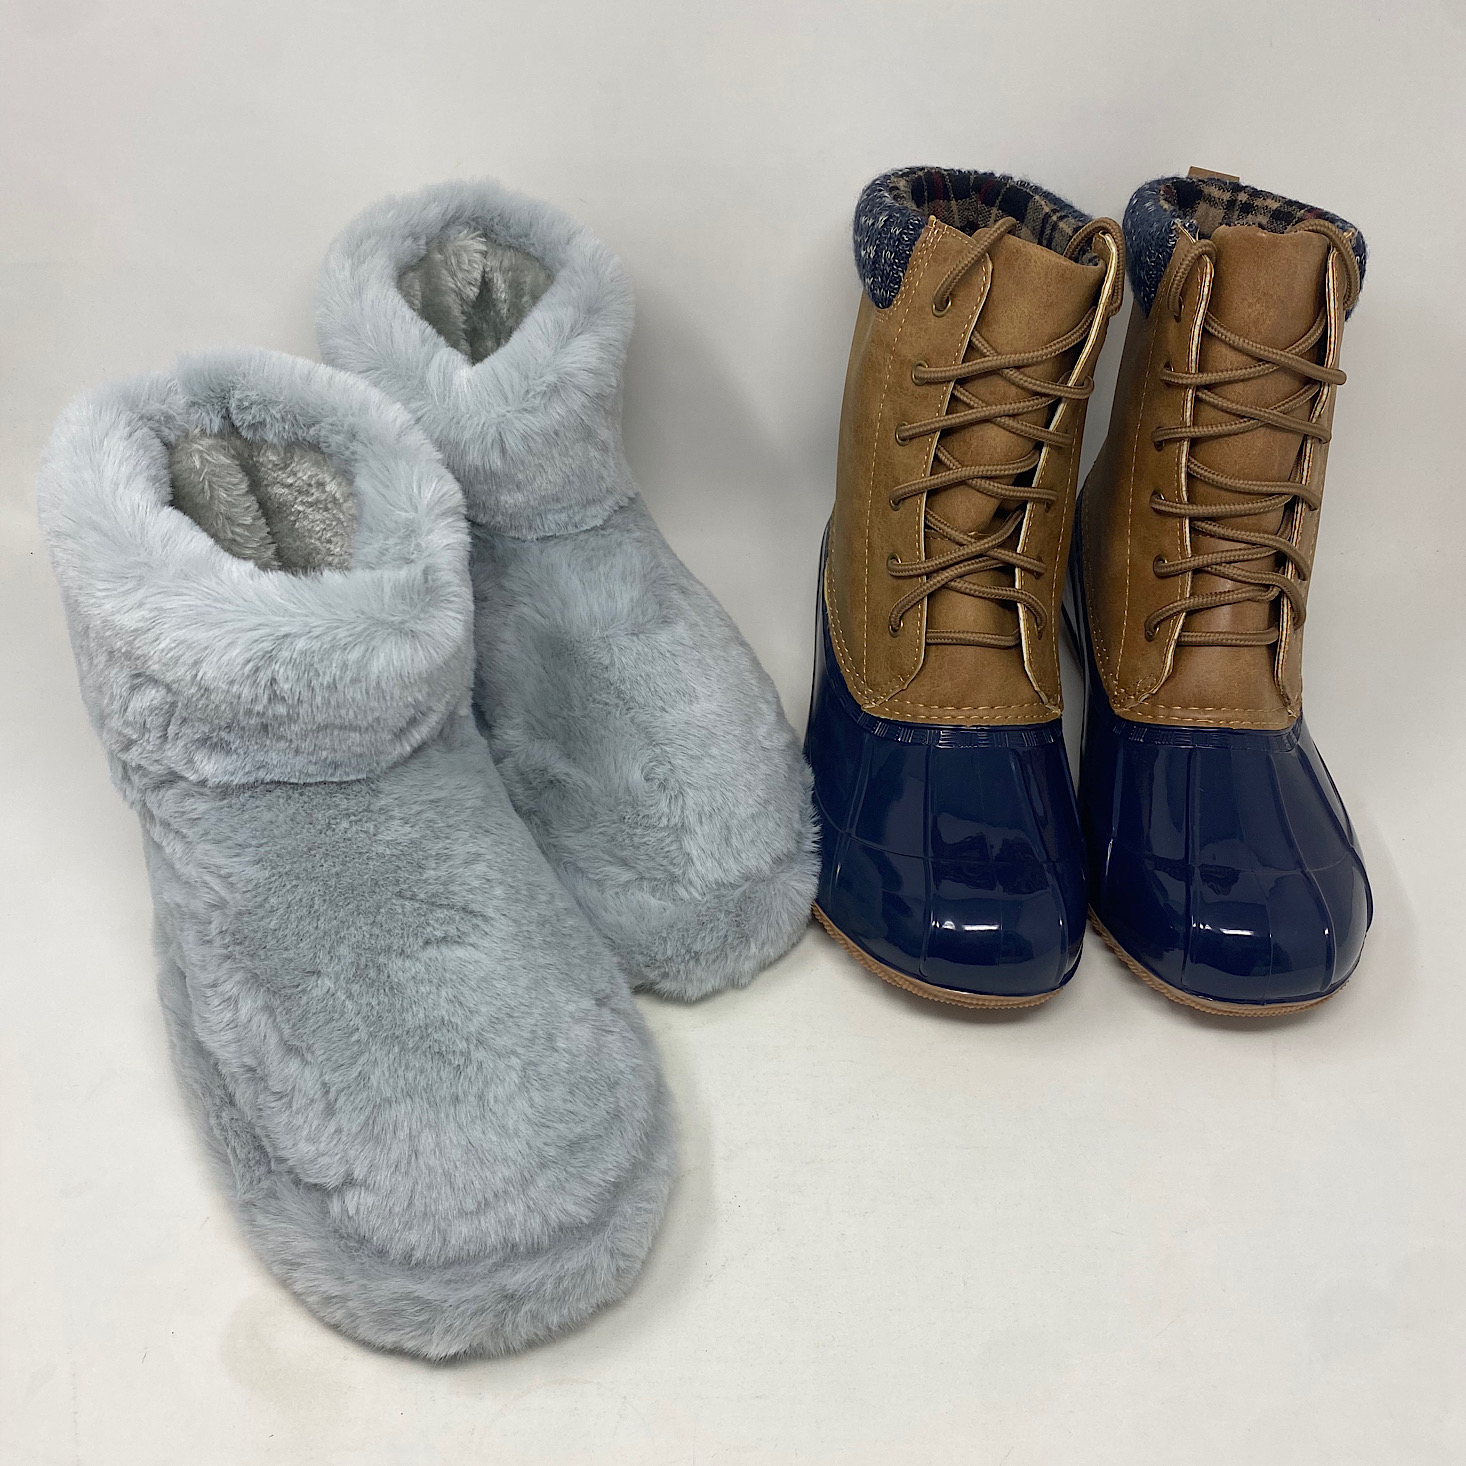 JustFab December 2021 Review + First Look for $10 Coupon